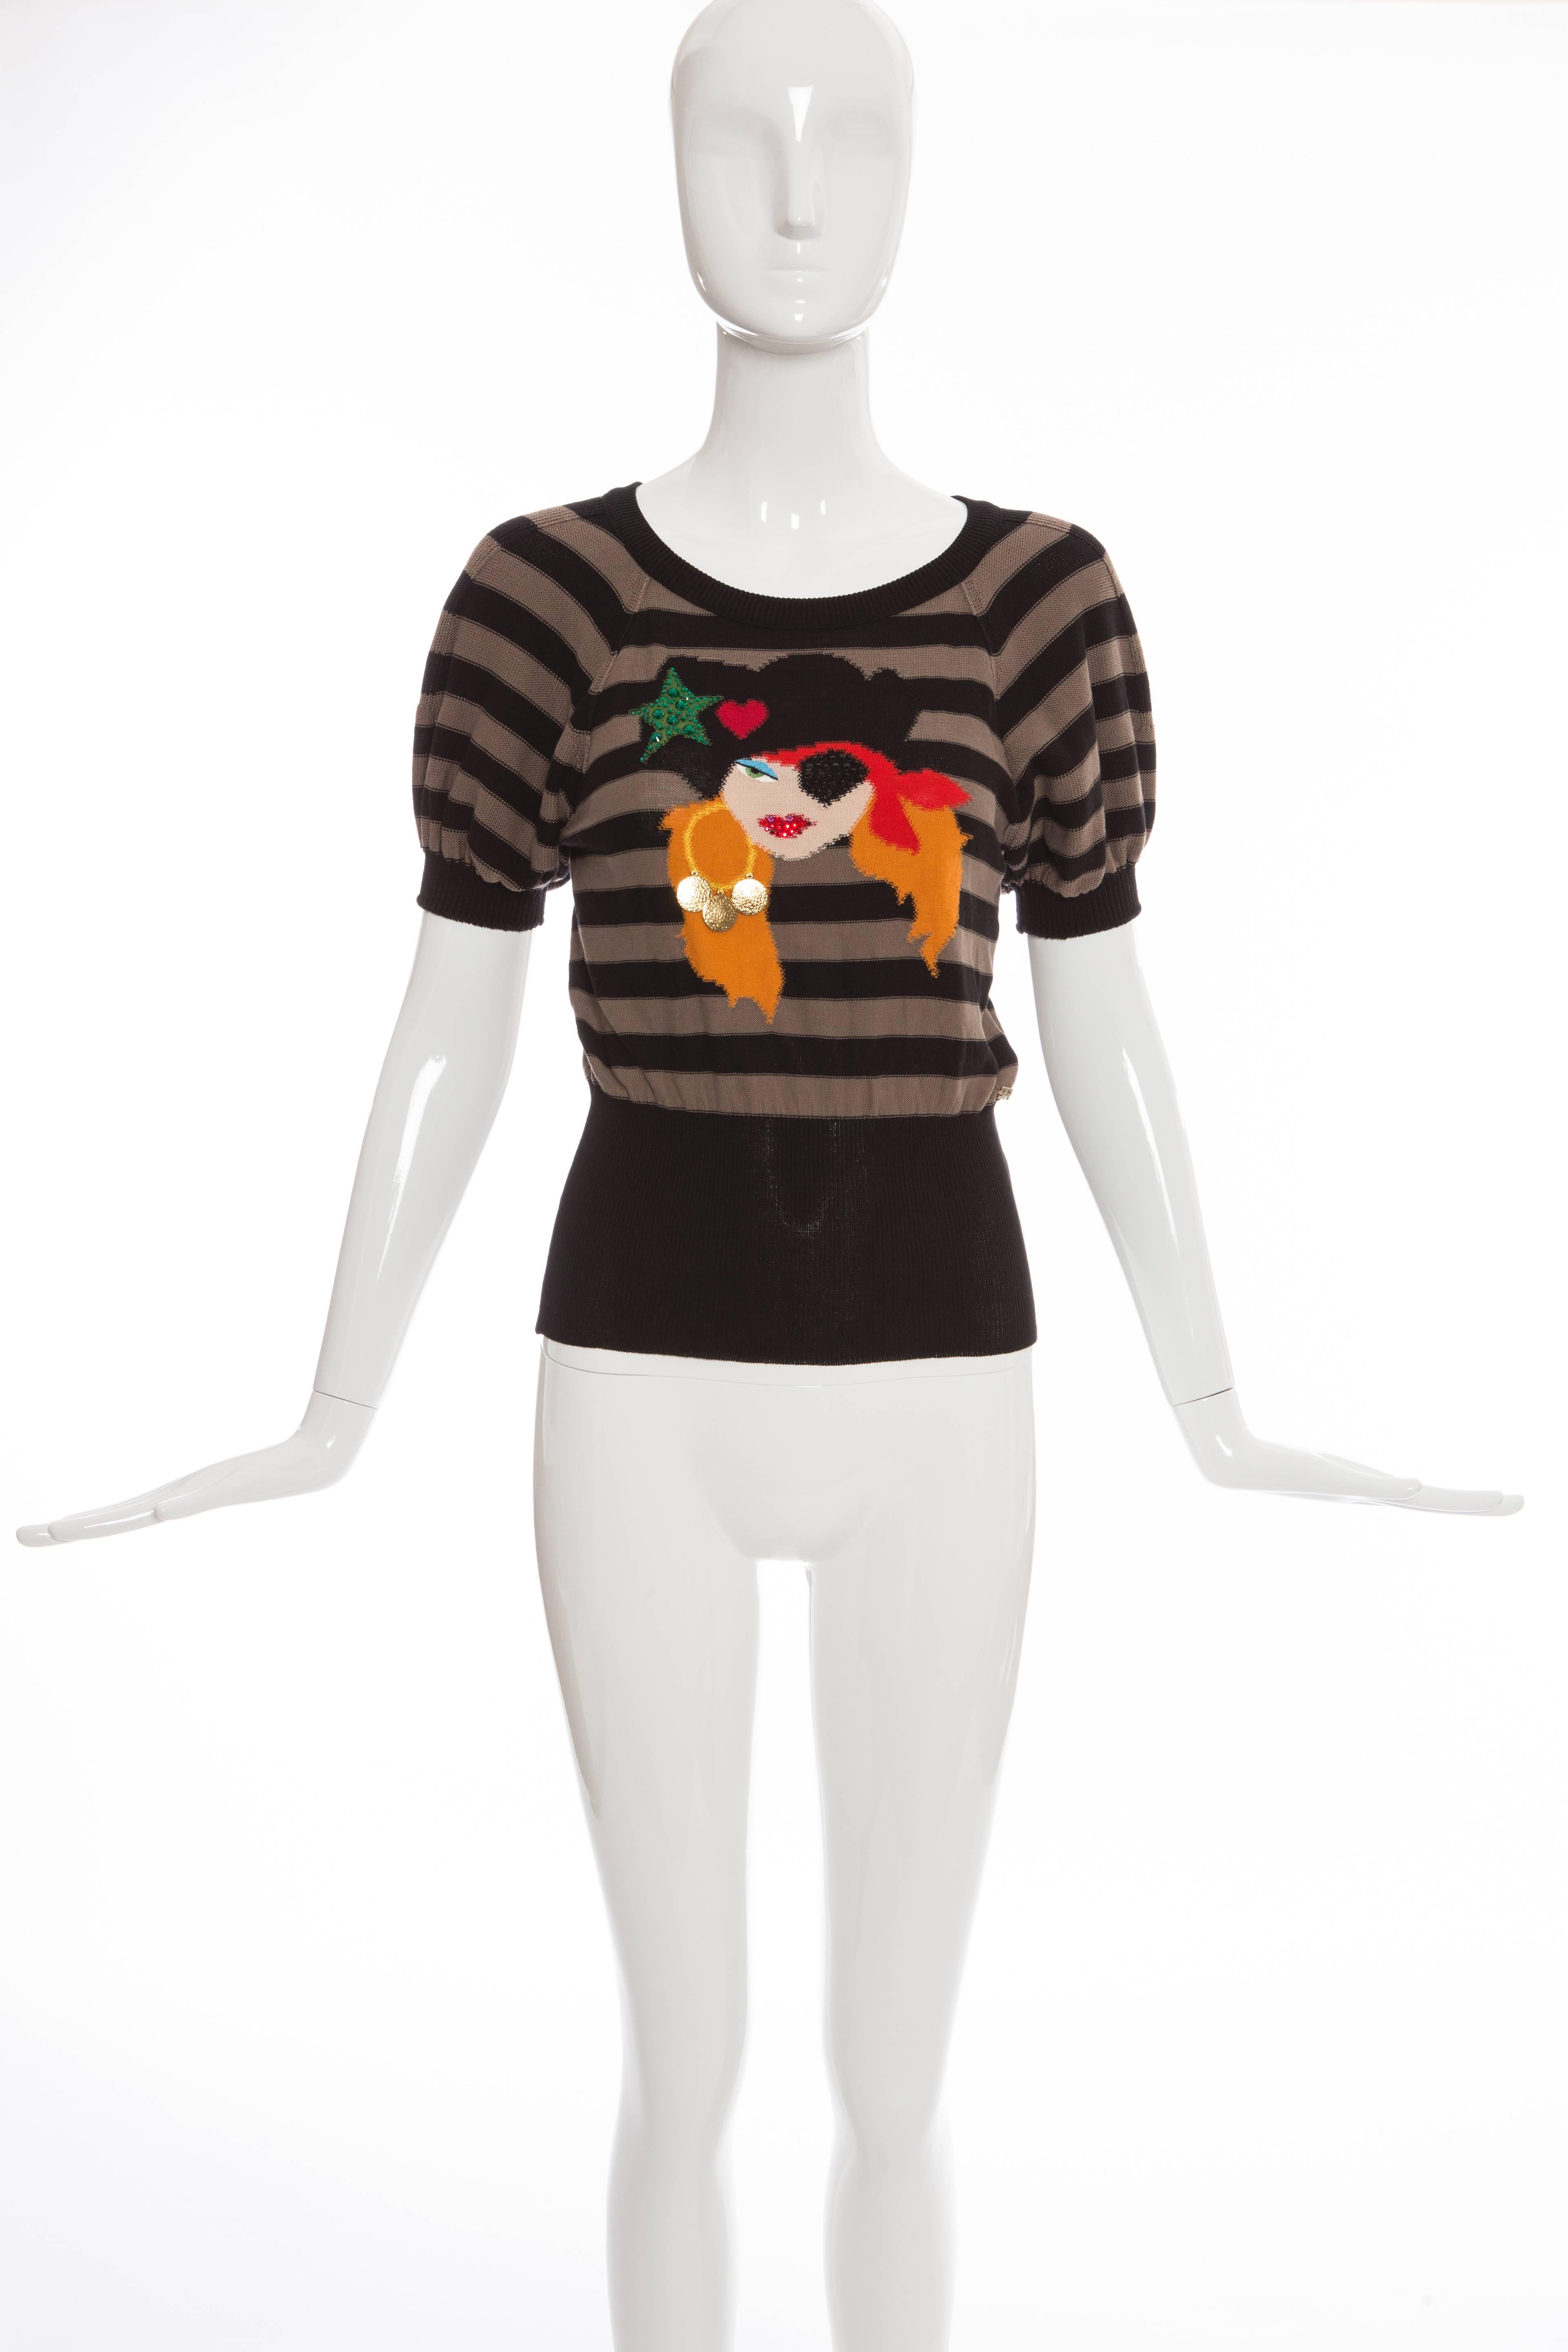 Sonia Rykiel, Spring-Summer 2005 cotton, knit sweater with stripes throughout, bejeweled embellishments, gold-tone hardware and pirate girl pattern at front.

FR. 38
US. 6

Bust 30”, Waist 21”, Length 21.5”

Fabric Content: 100% Cotton